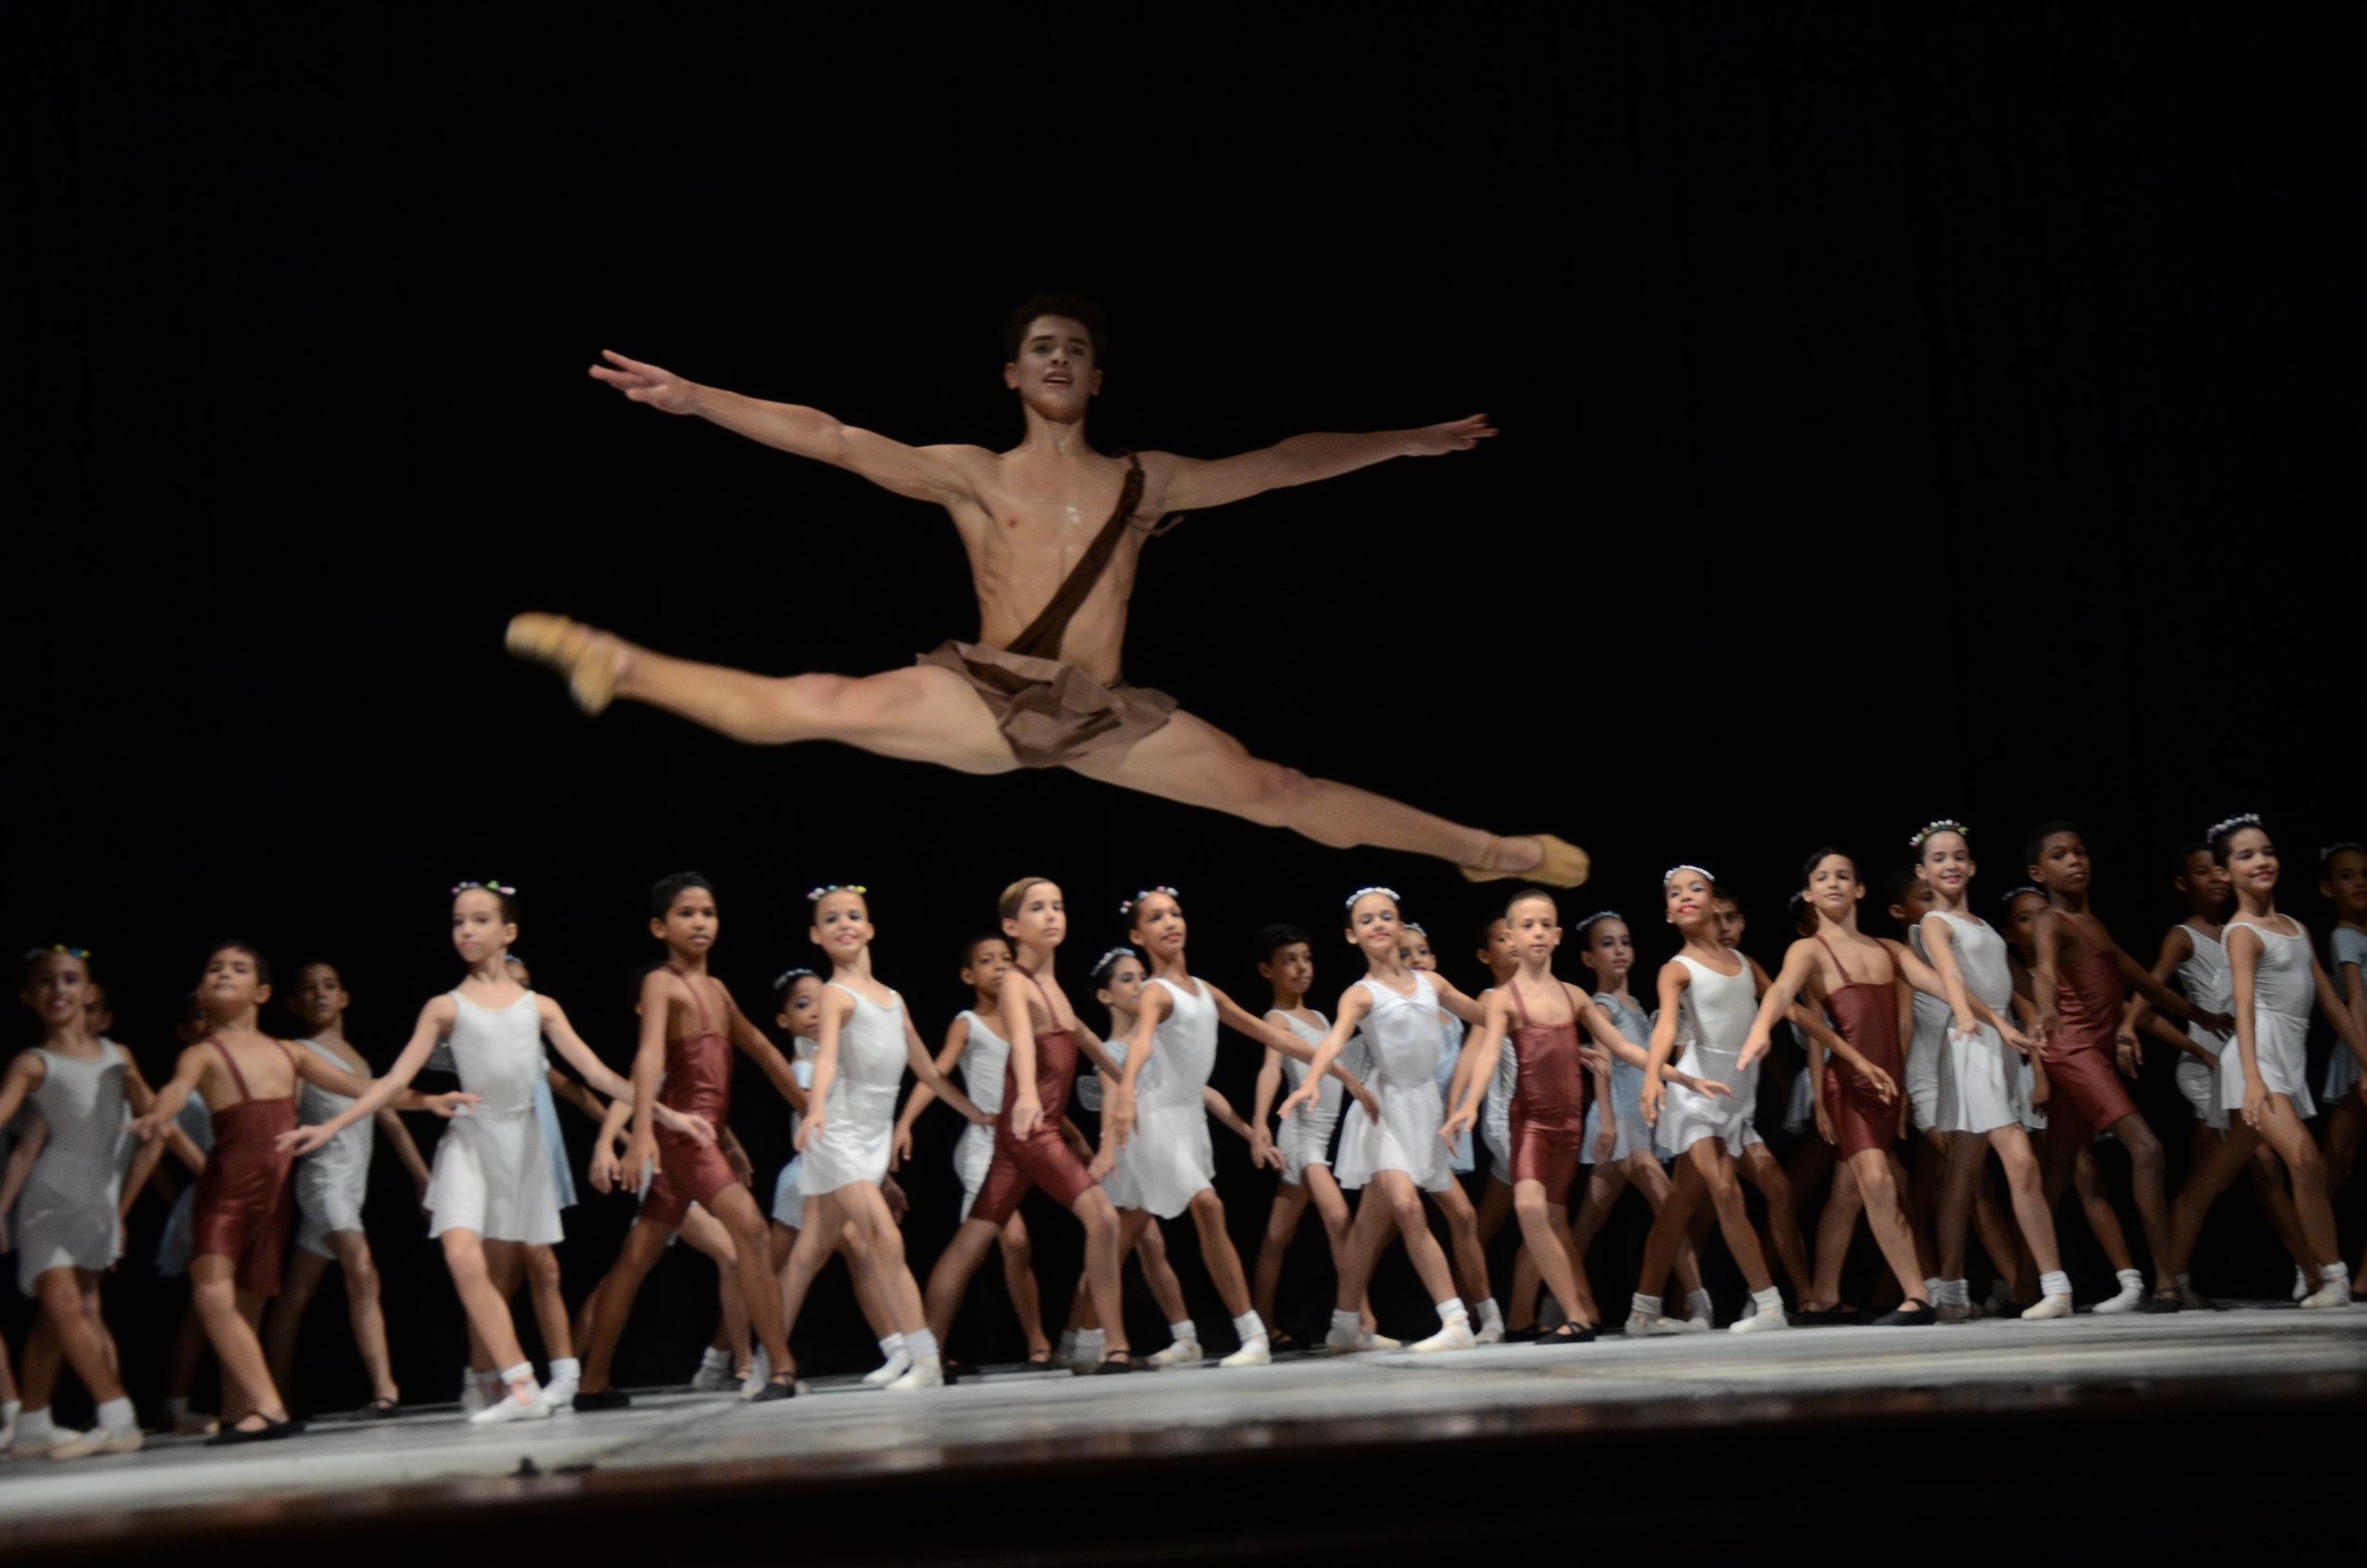 Alexis+and+his+fellow+students+of+the+National+Ballet+School+of+Cuba+11+©+Indyca.jpg